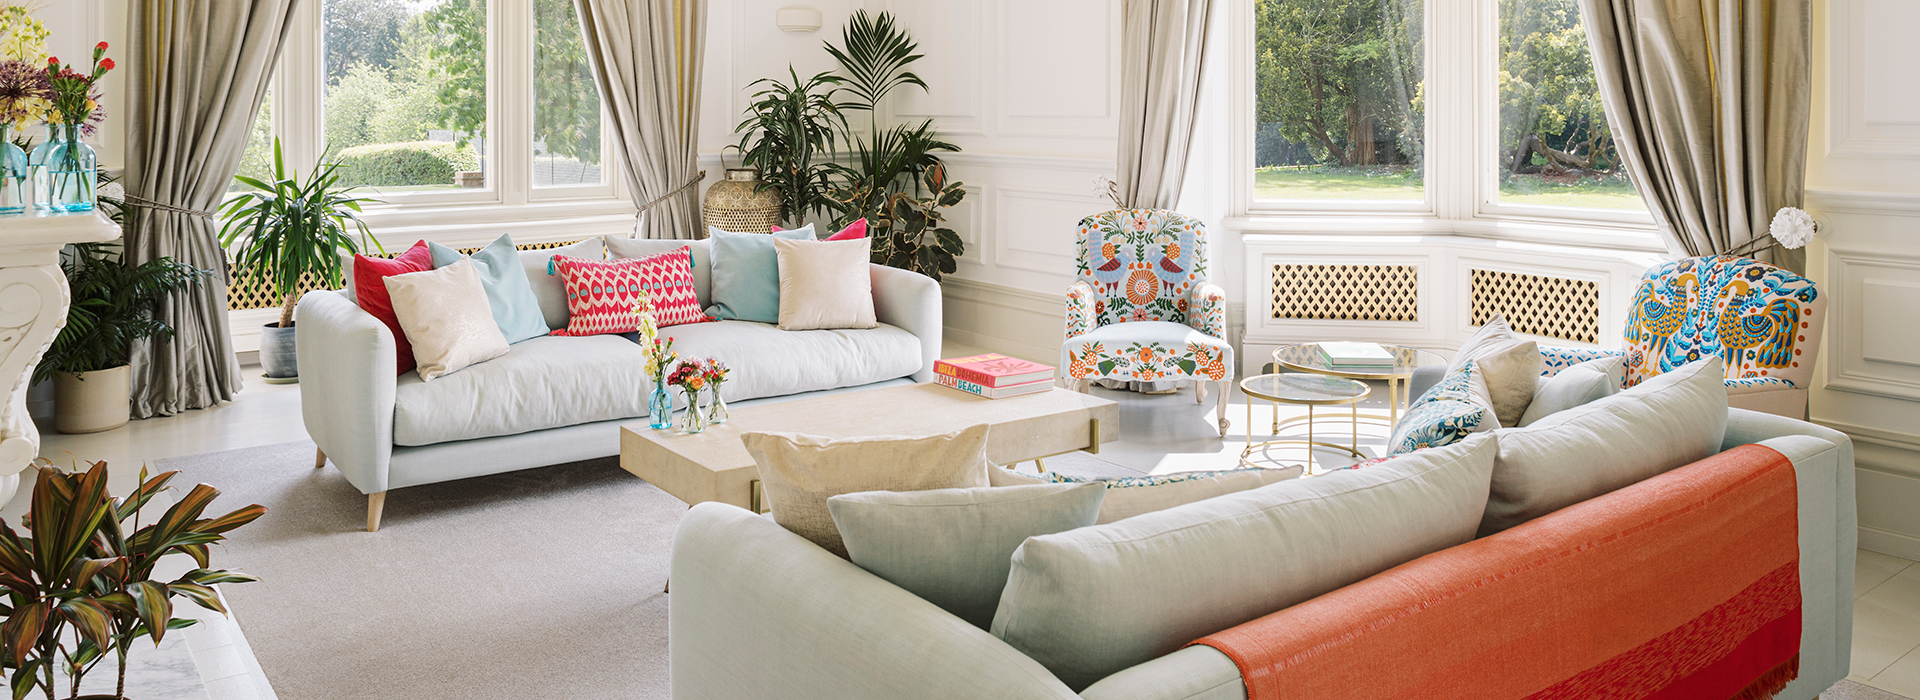 Large bright lounge with two cream sofas positioned opposite each other covered in brightly coloured cushions of turquoise and cerise pink